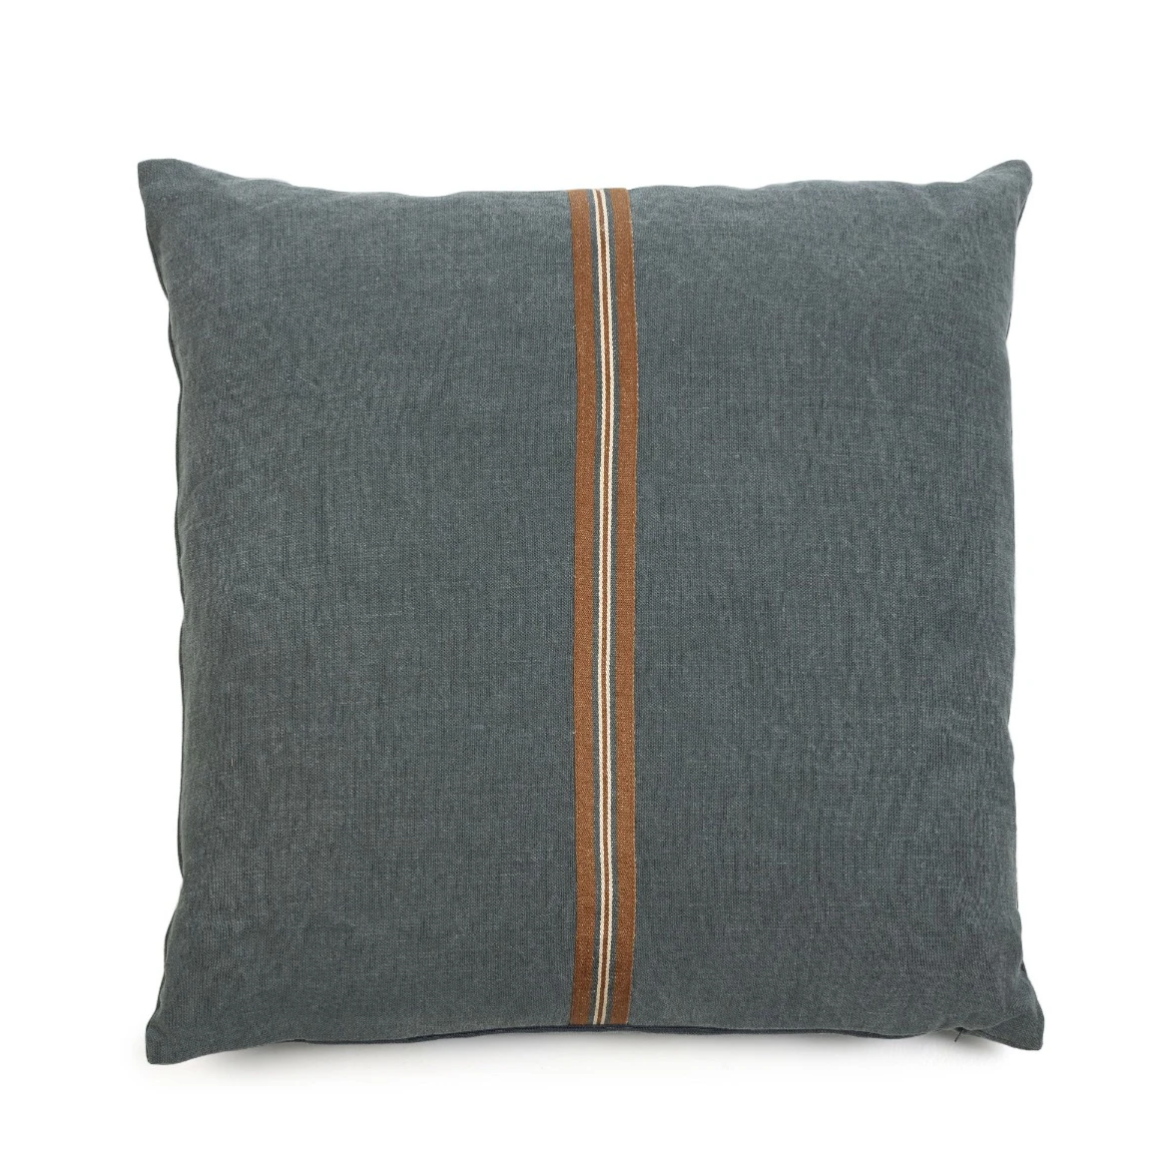 Atlas River pillow covers by Libeco